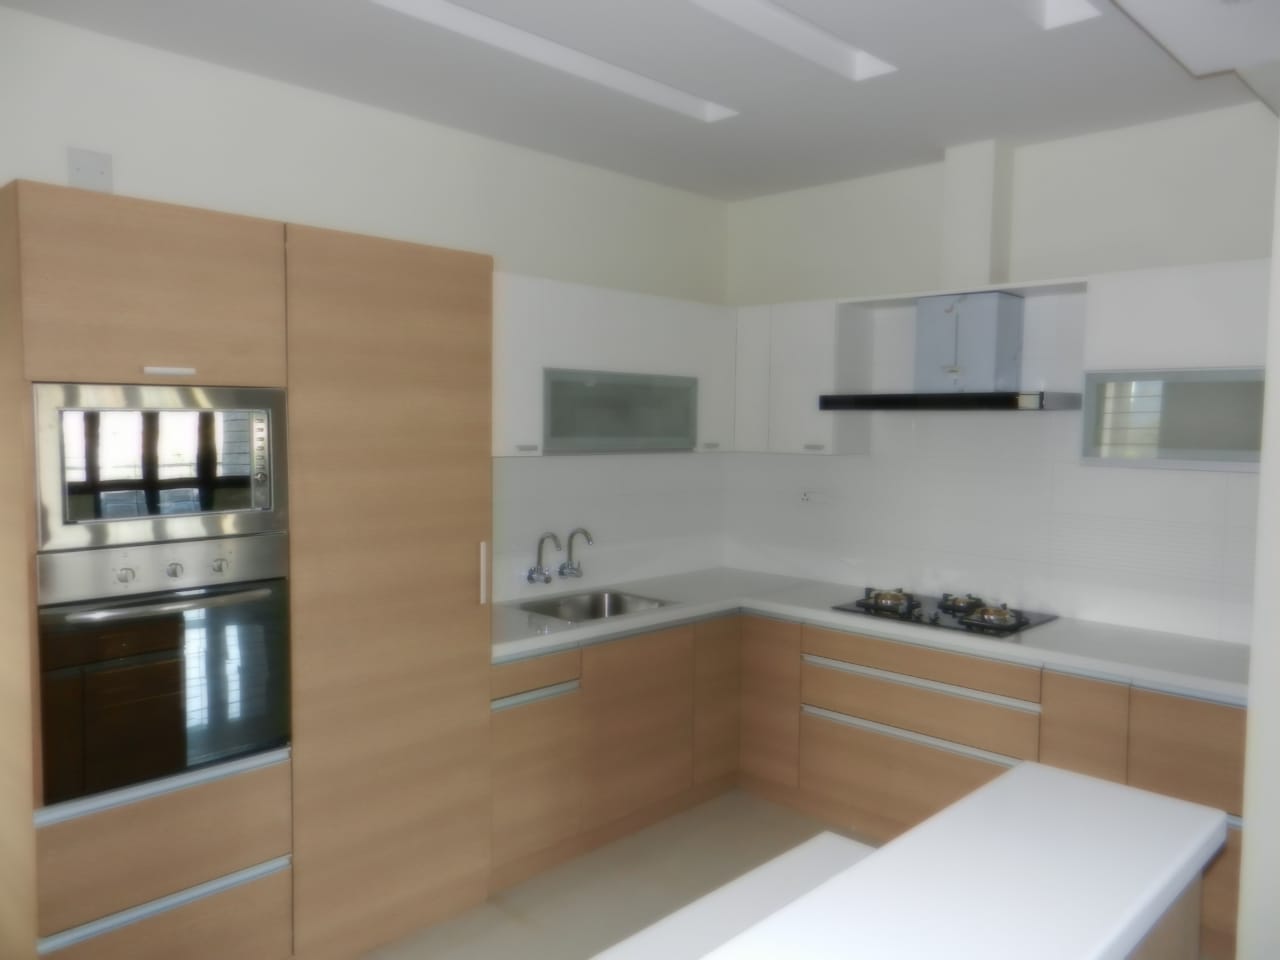 3BHK Flat for Rent in Dollar’s Colony